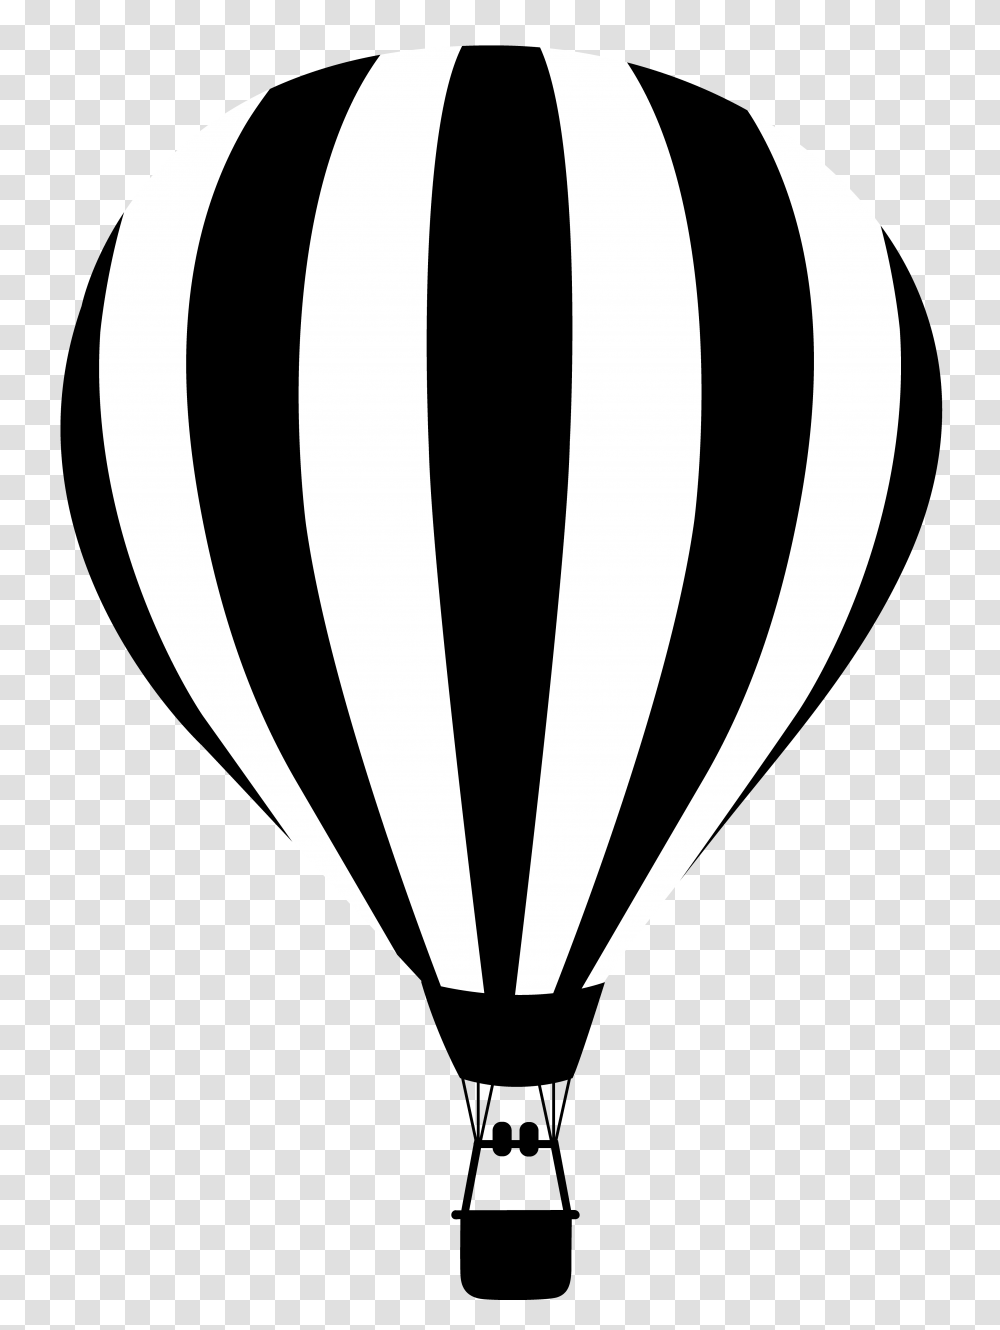 Hot Air Balloon Clip Art Black And White Free Image, Aircraft, Vehicle, Transportation, Light Transparent Png